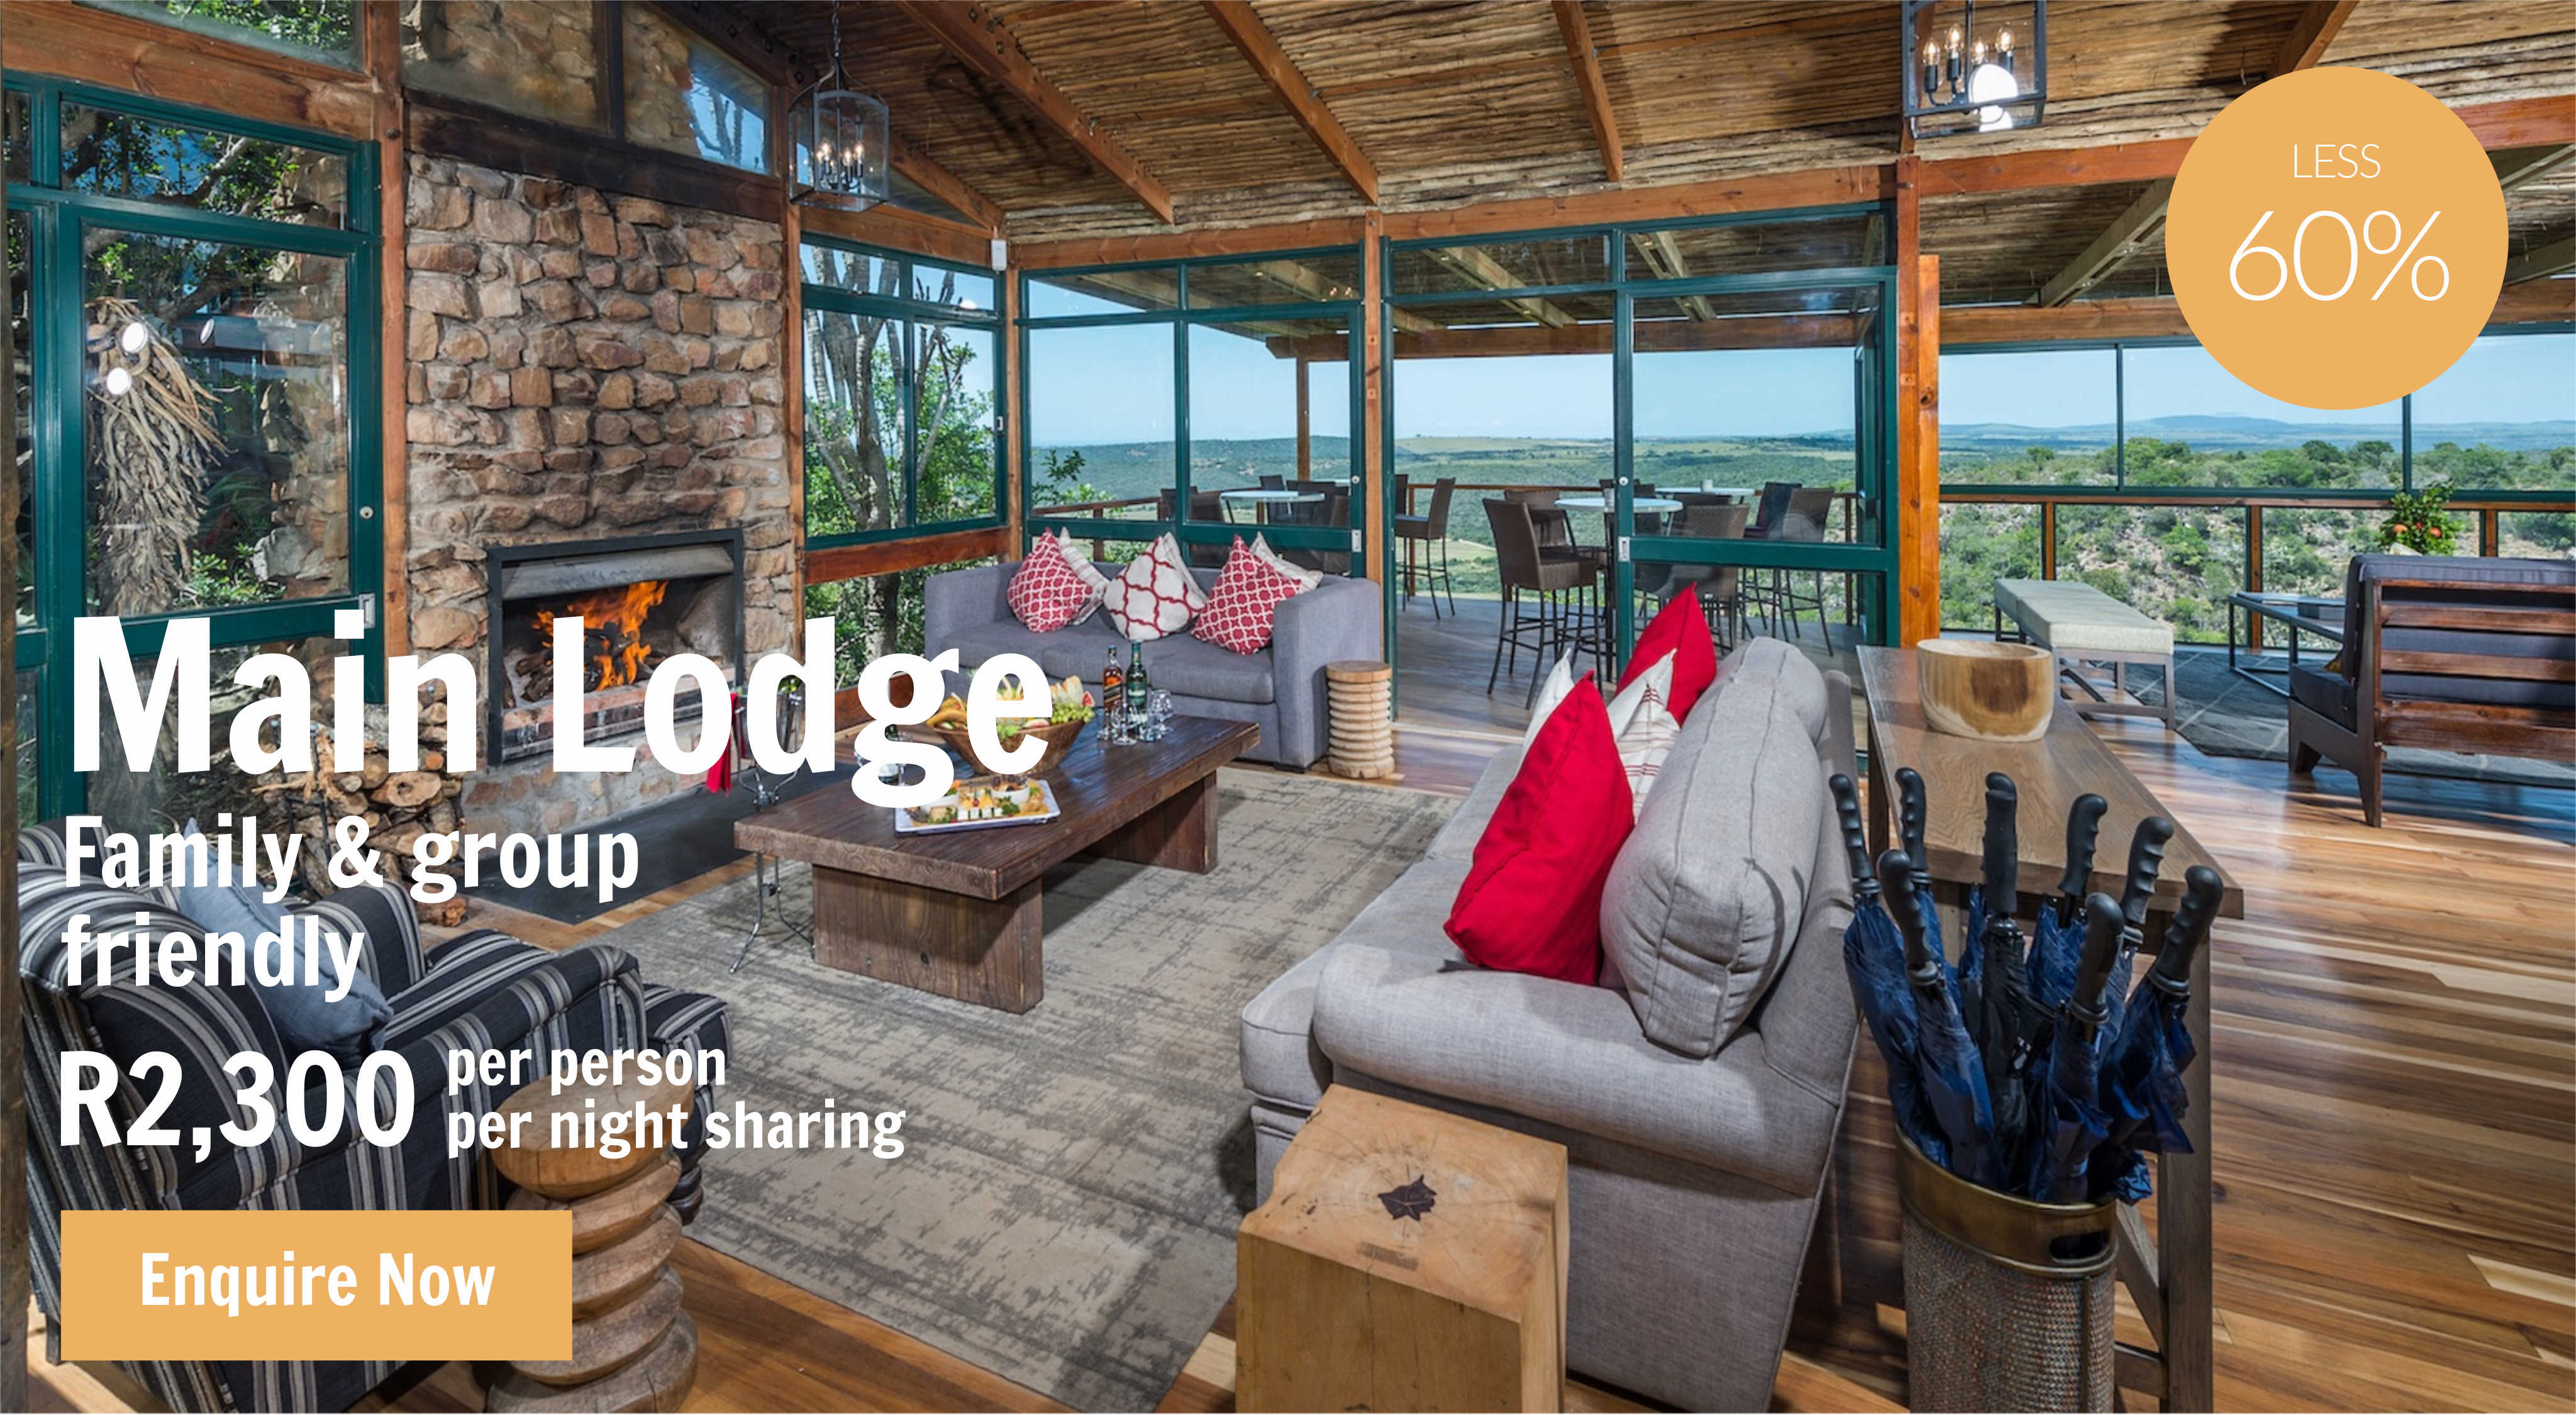 Main Lodge Safari Special for South Africans